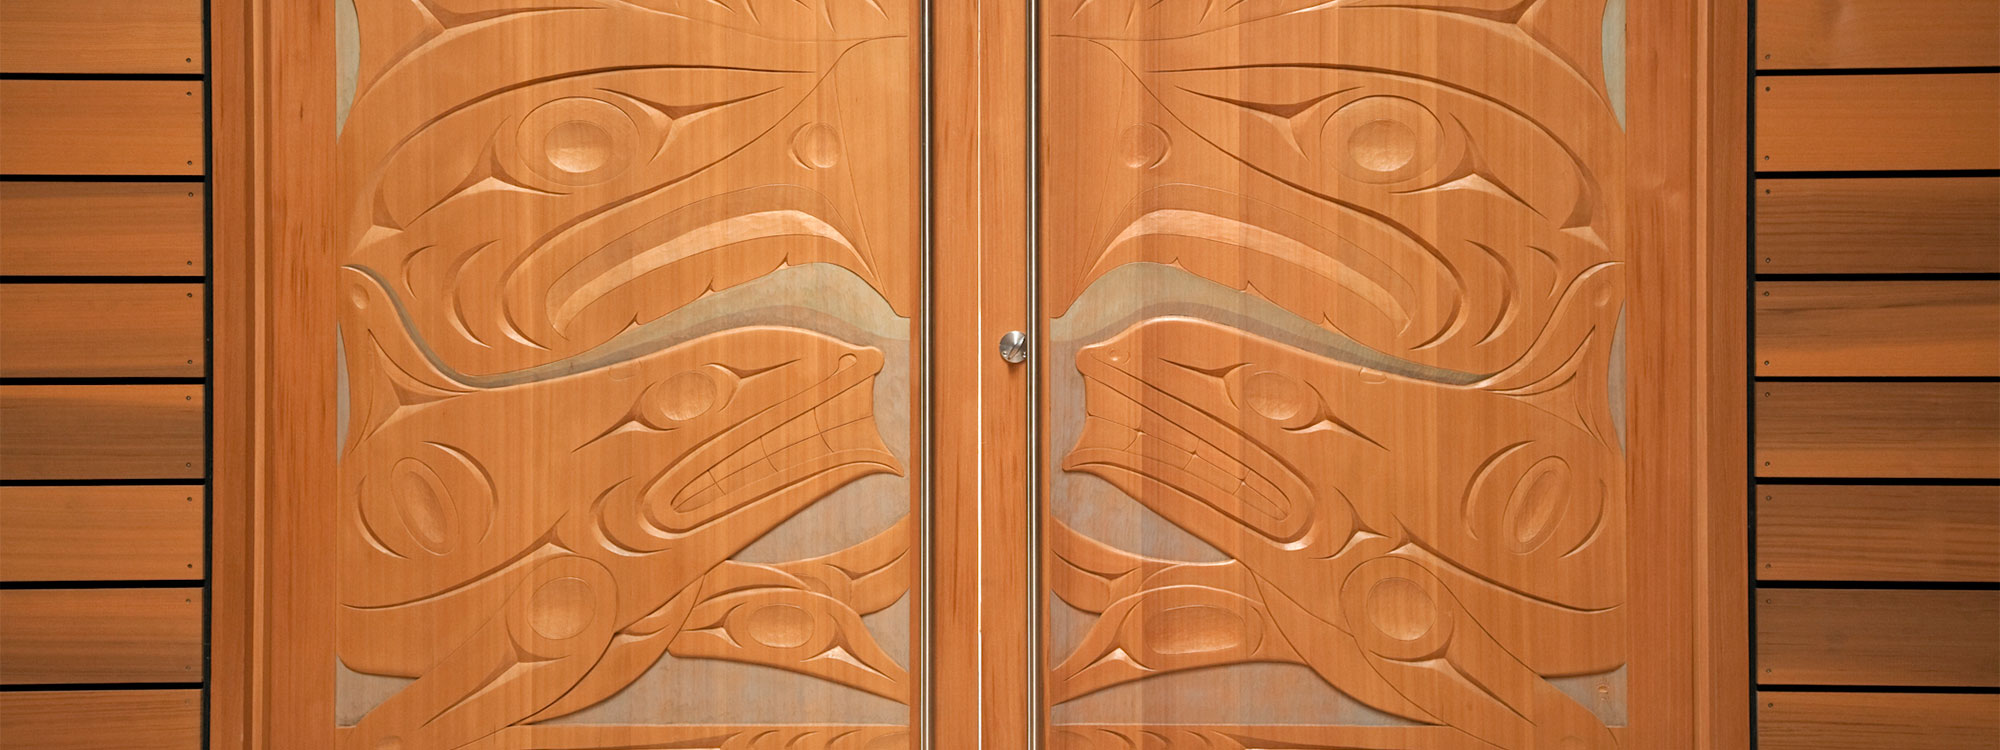 The First Peoples House at the University of Victoria. Pictured: Xwa Lack Tun's (Rick Harry) carved doors to the Ceremonial Hall.